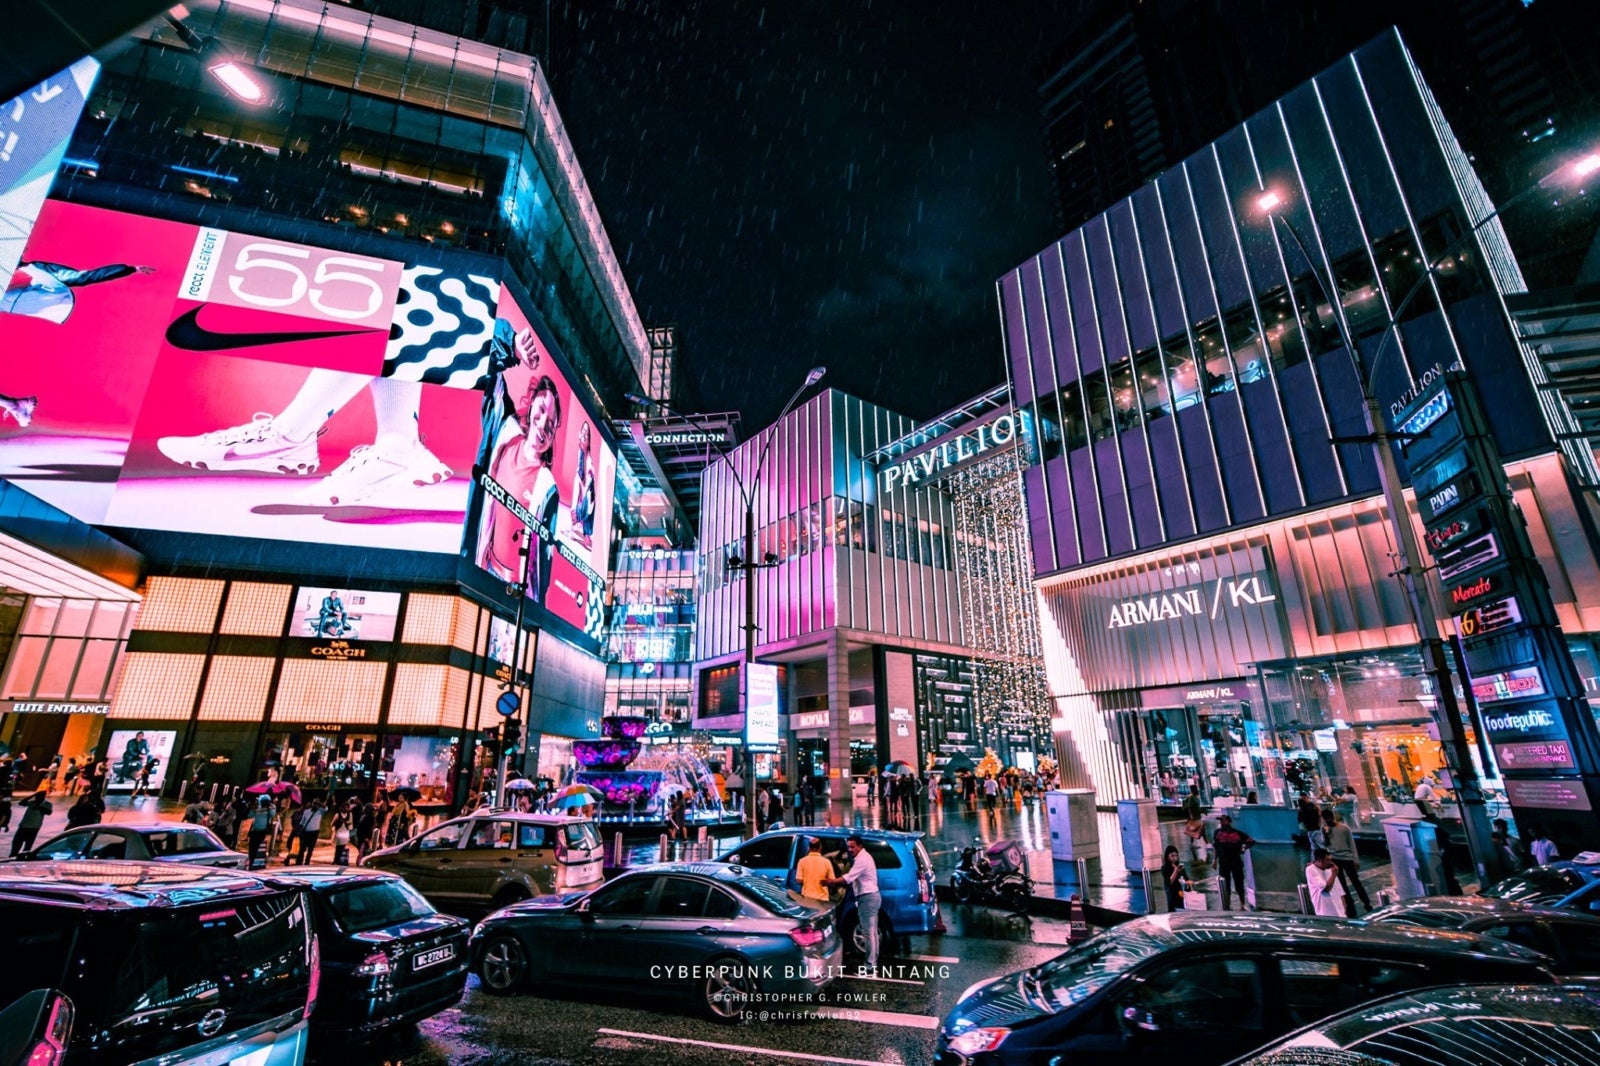 Local Photographer Gives Bukit Bintang a Cyberpunk Twist That's So Good You'd Wish It Was Real Life - WORLD OF BUZZ 6